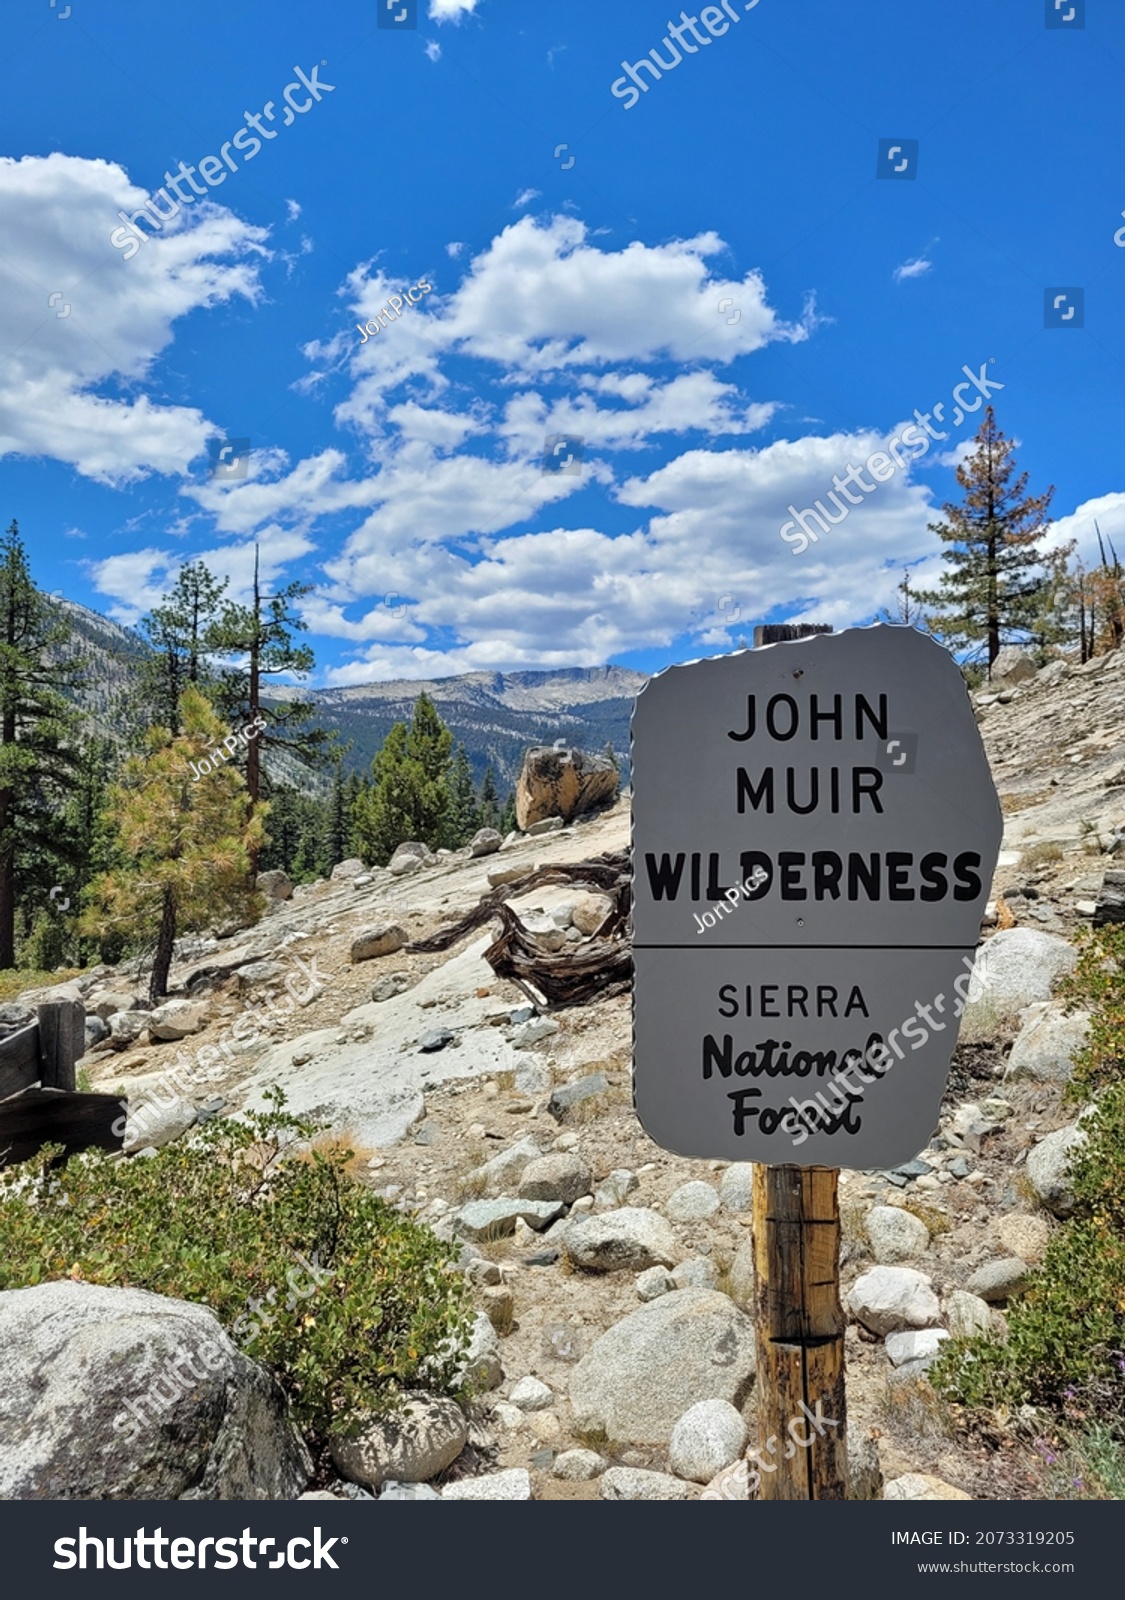 are dogs allowed in the john muir wilderness